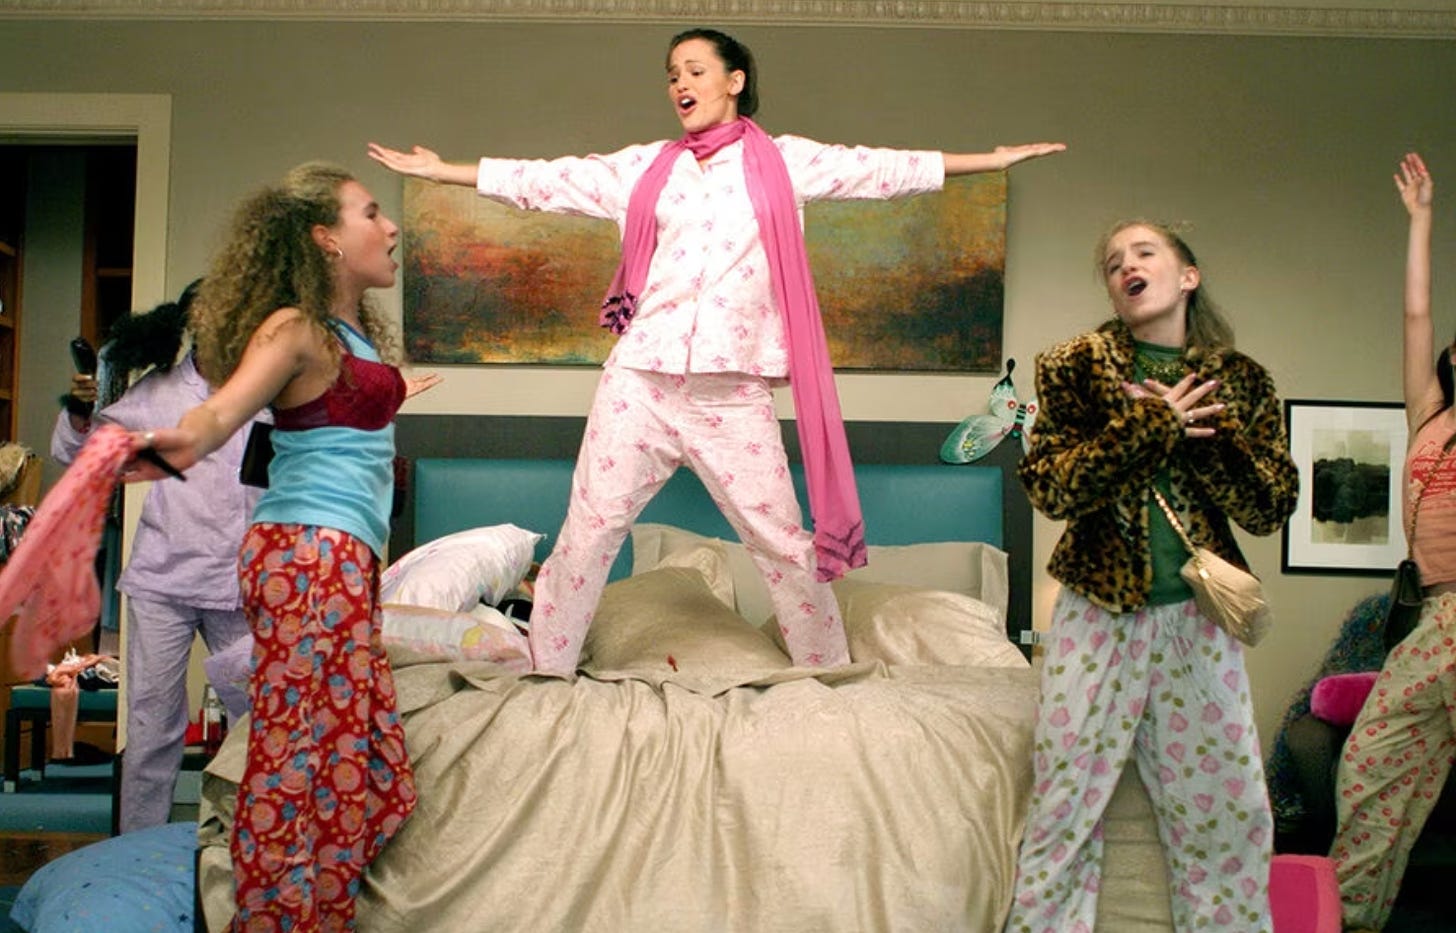 Jenna Rink at a slumber party in 13 Going on 30.